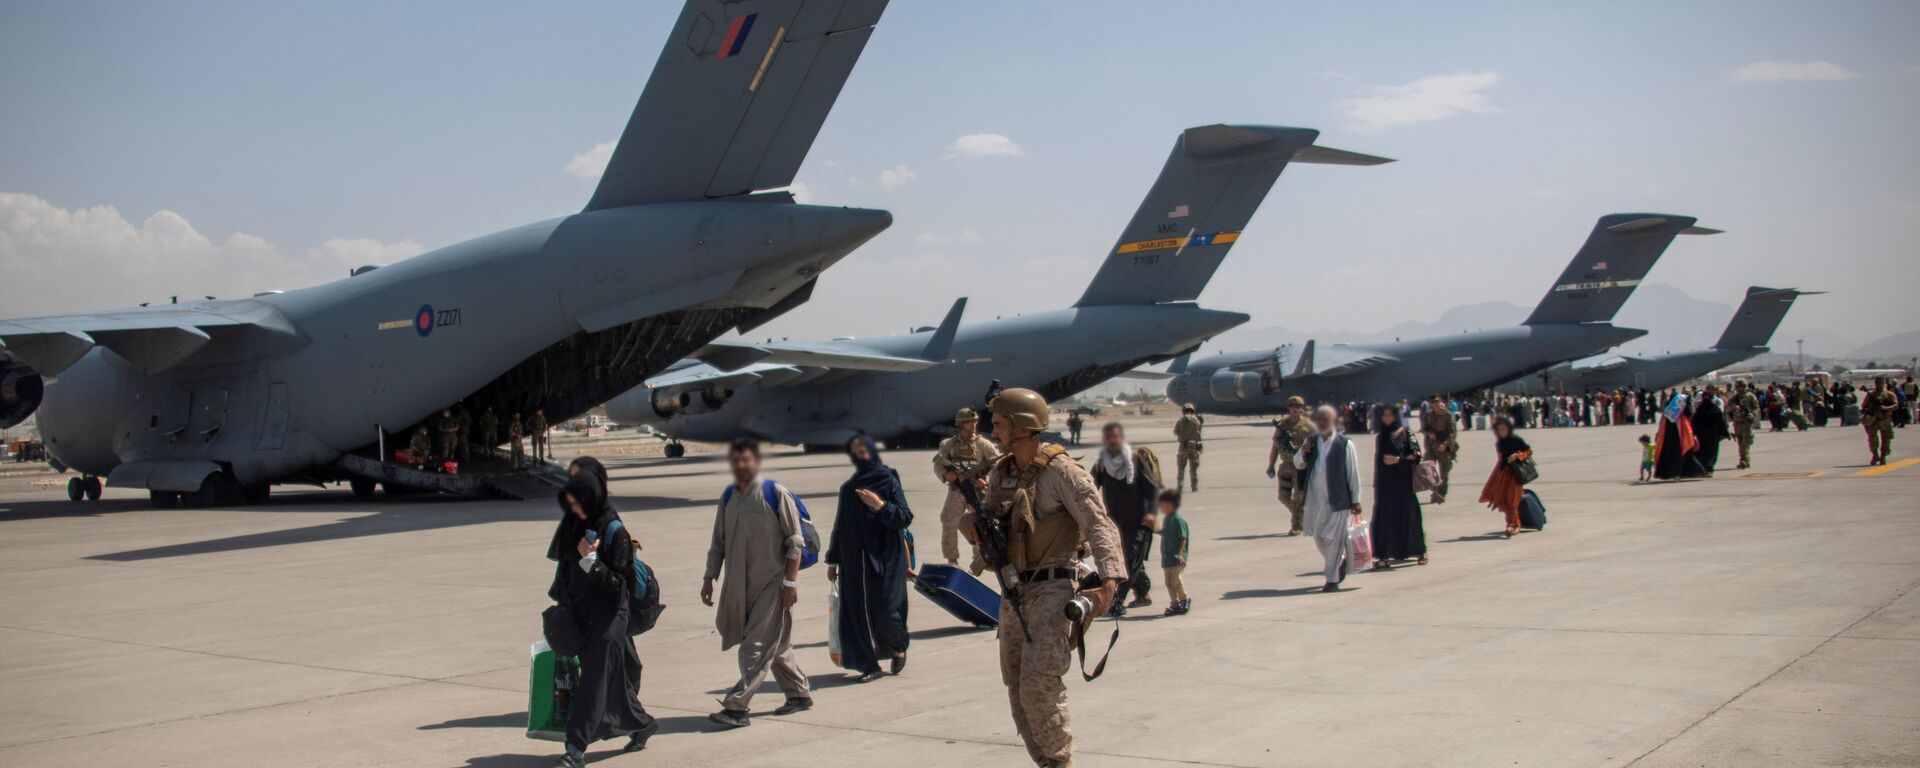 Members of the UK Armed Forces continue to take part in the evacuation of entitled personnel from Kabul airport, in Kabul, Afghanistan August 19-22, 2021, in this handout picture obtained by Reuters on August 23, 2021. LPhot Ben Shread/UK MOD Crown copyright 2021/Handout via REUTERS  THIS IMAGE HAS BEEN SUPPLIED BY A THIRD PARTY. MANDATORY CREDIT. NO RESALES. NO ARCHIVES. - Sputnik International, 1920, 07.12.2021